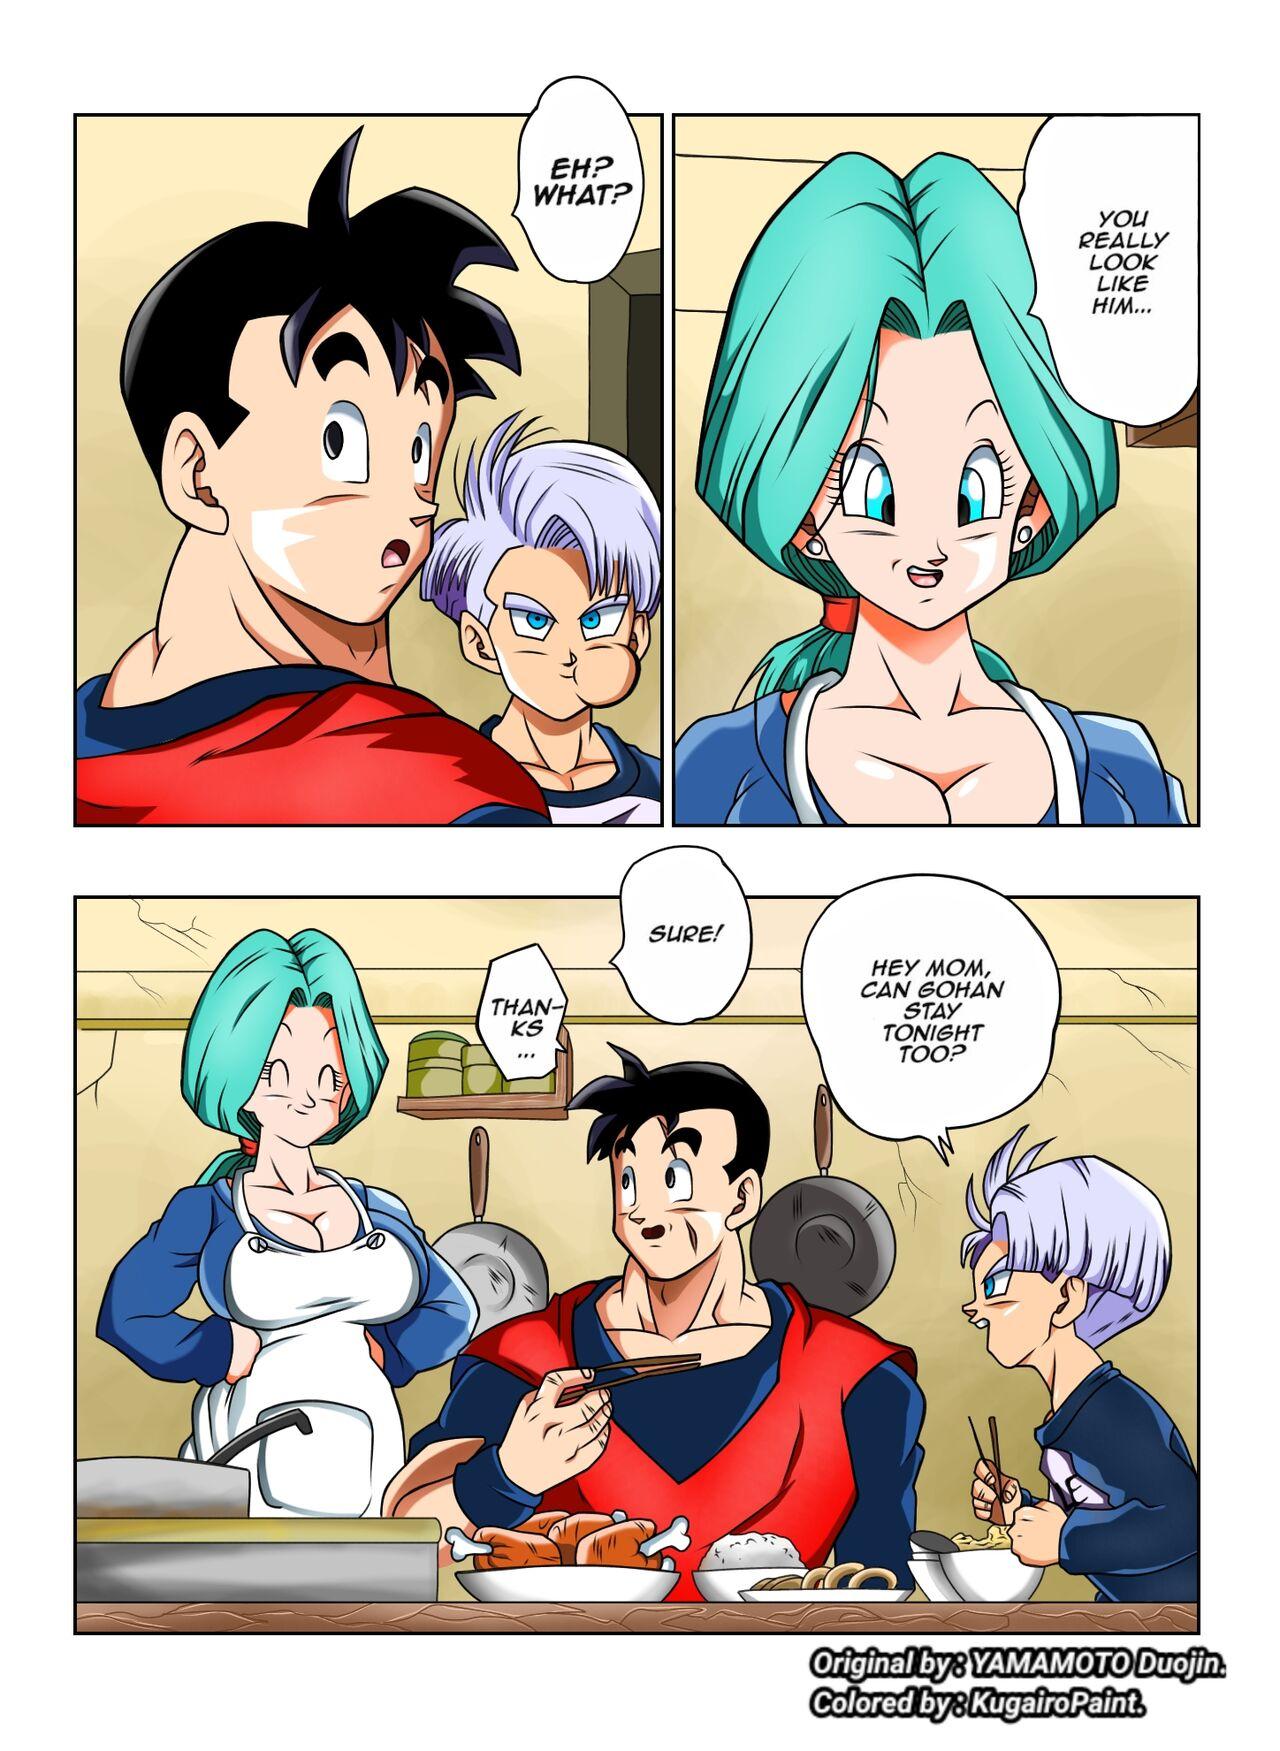 Fat Lots of Sex in this Future!! - Dragon ball z Lovers - Page 3